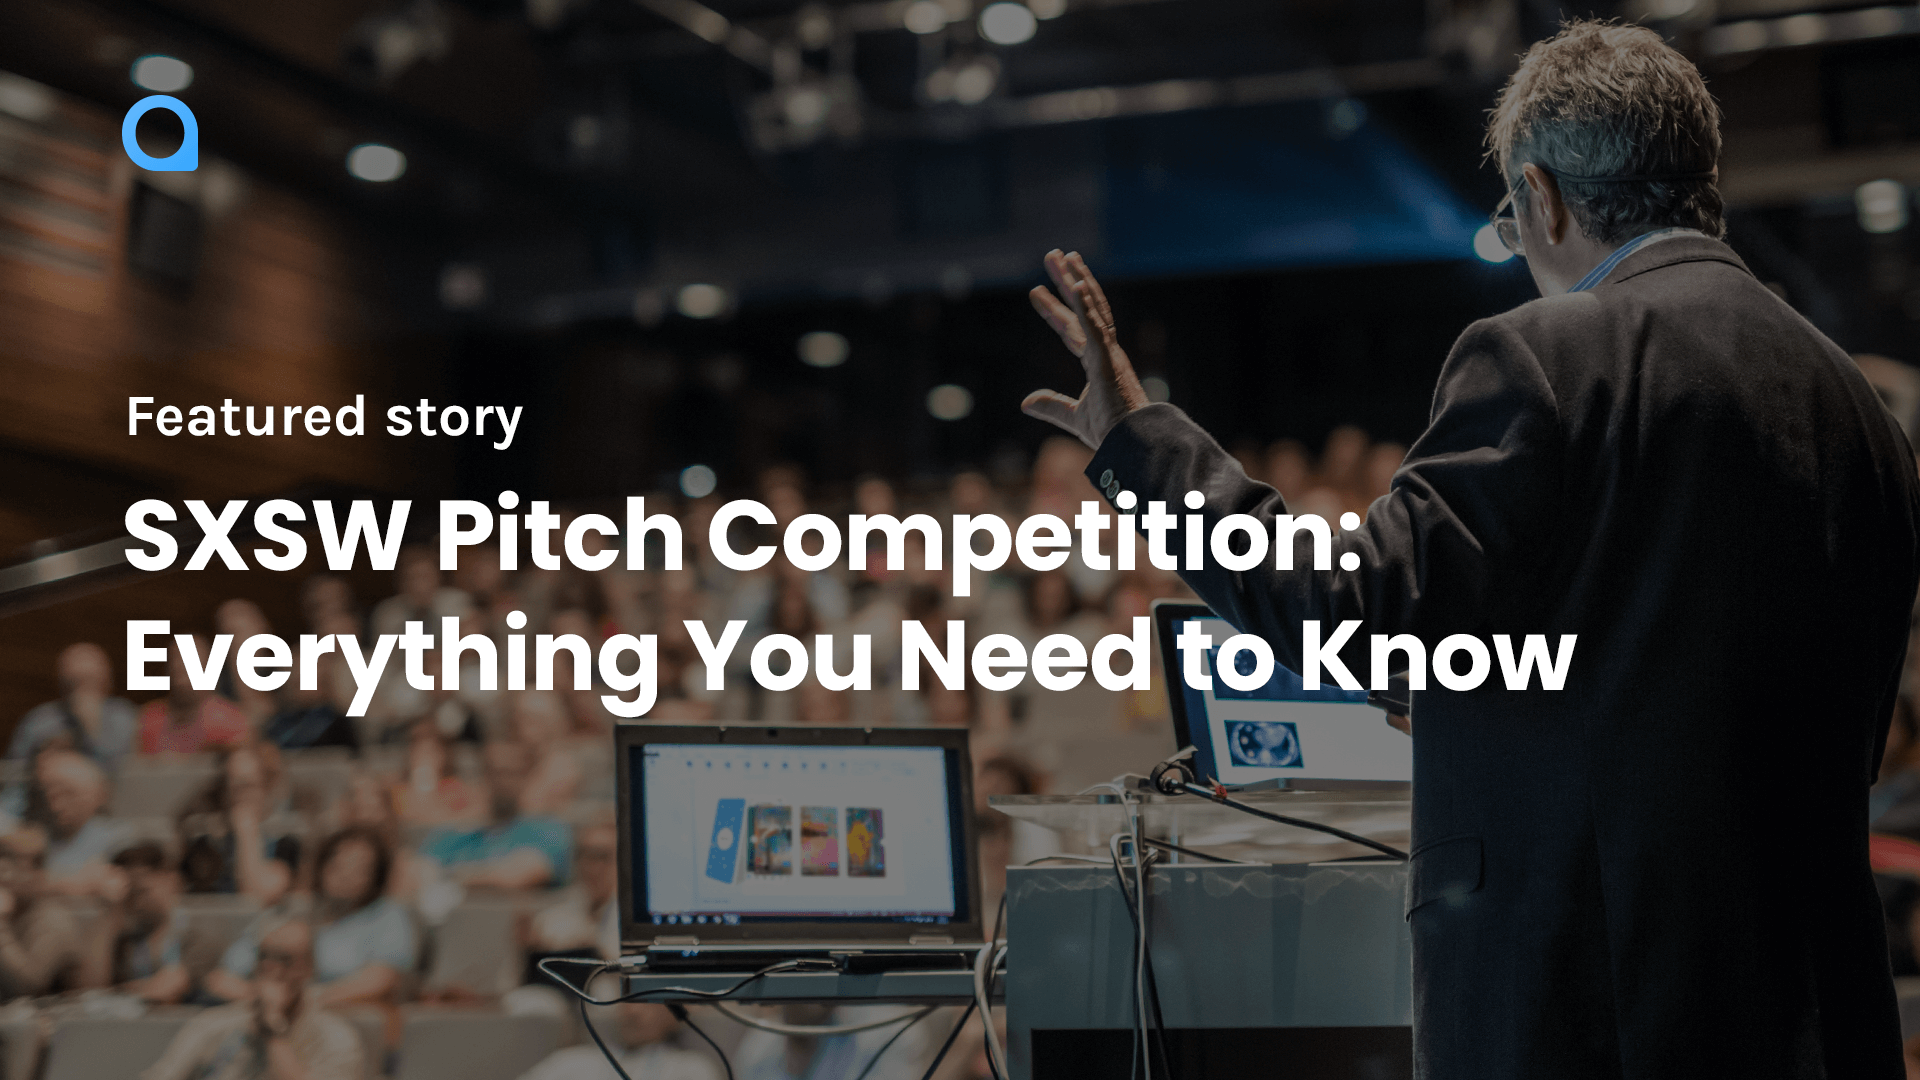 SXSW Pitch Competition: Everything You Need to Know